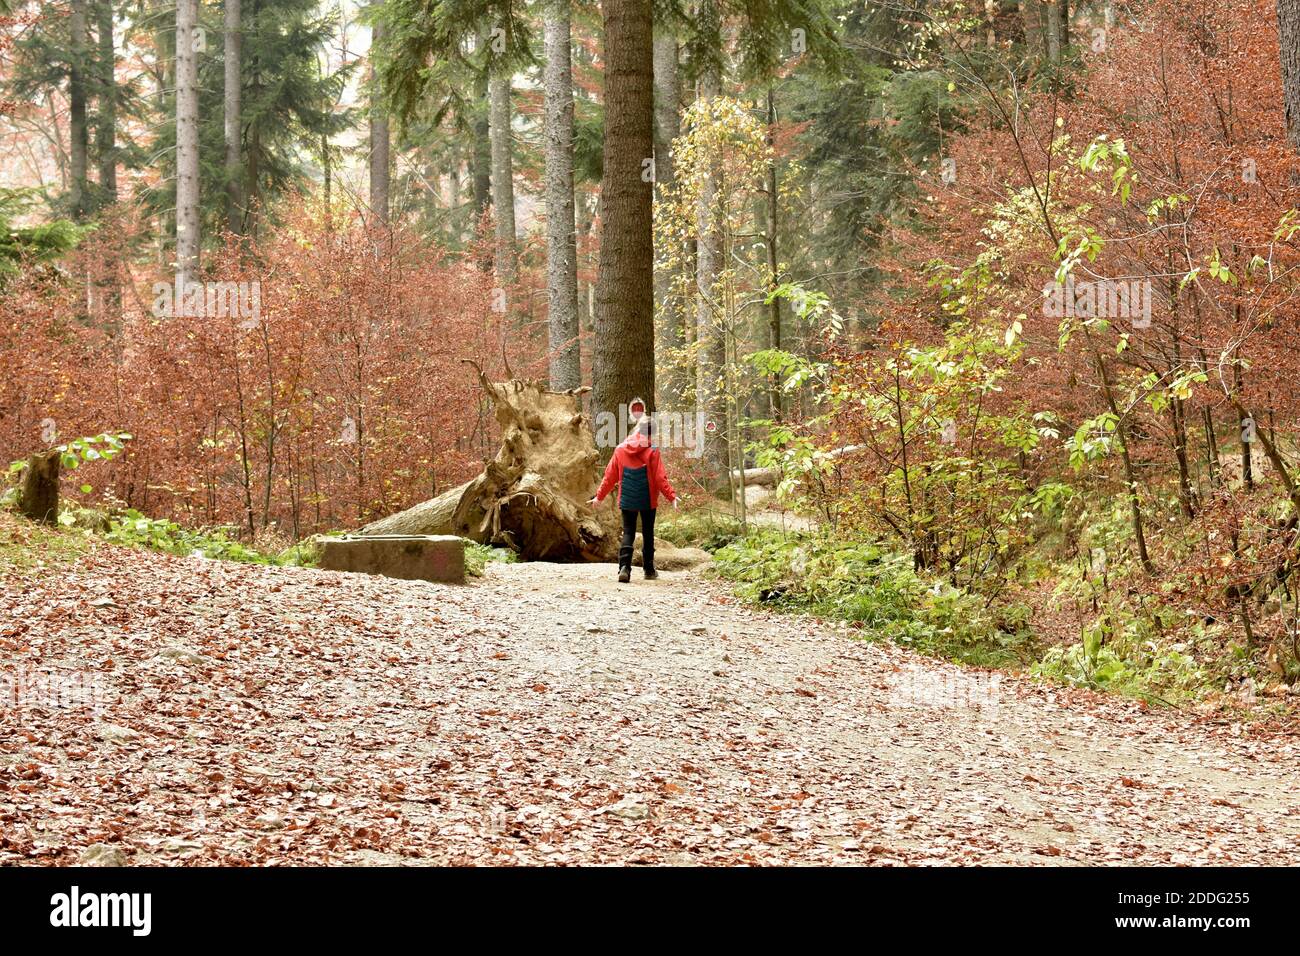 Happy child in the forest walking along a path in autumn color season. Stock Photo